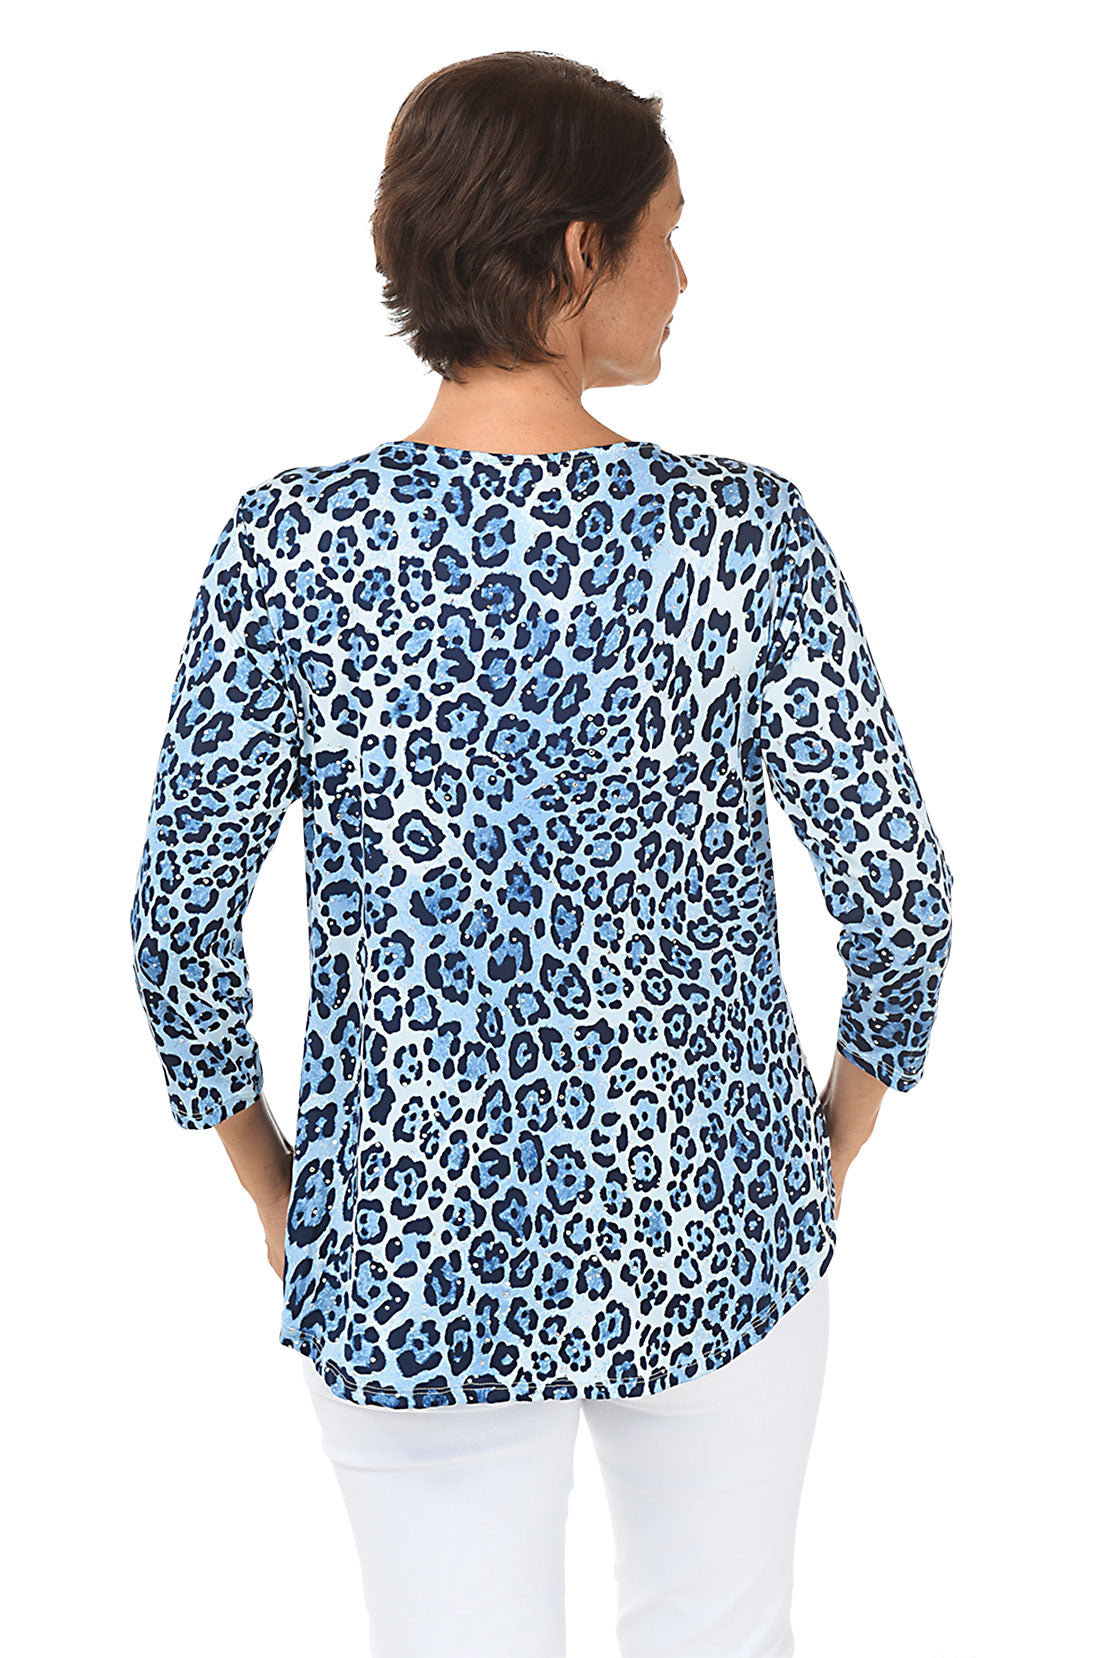 Blue Studded Cheetah Ring-Neck Knit Top